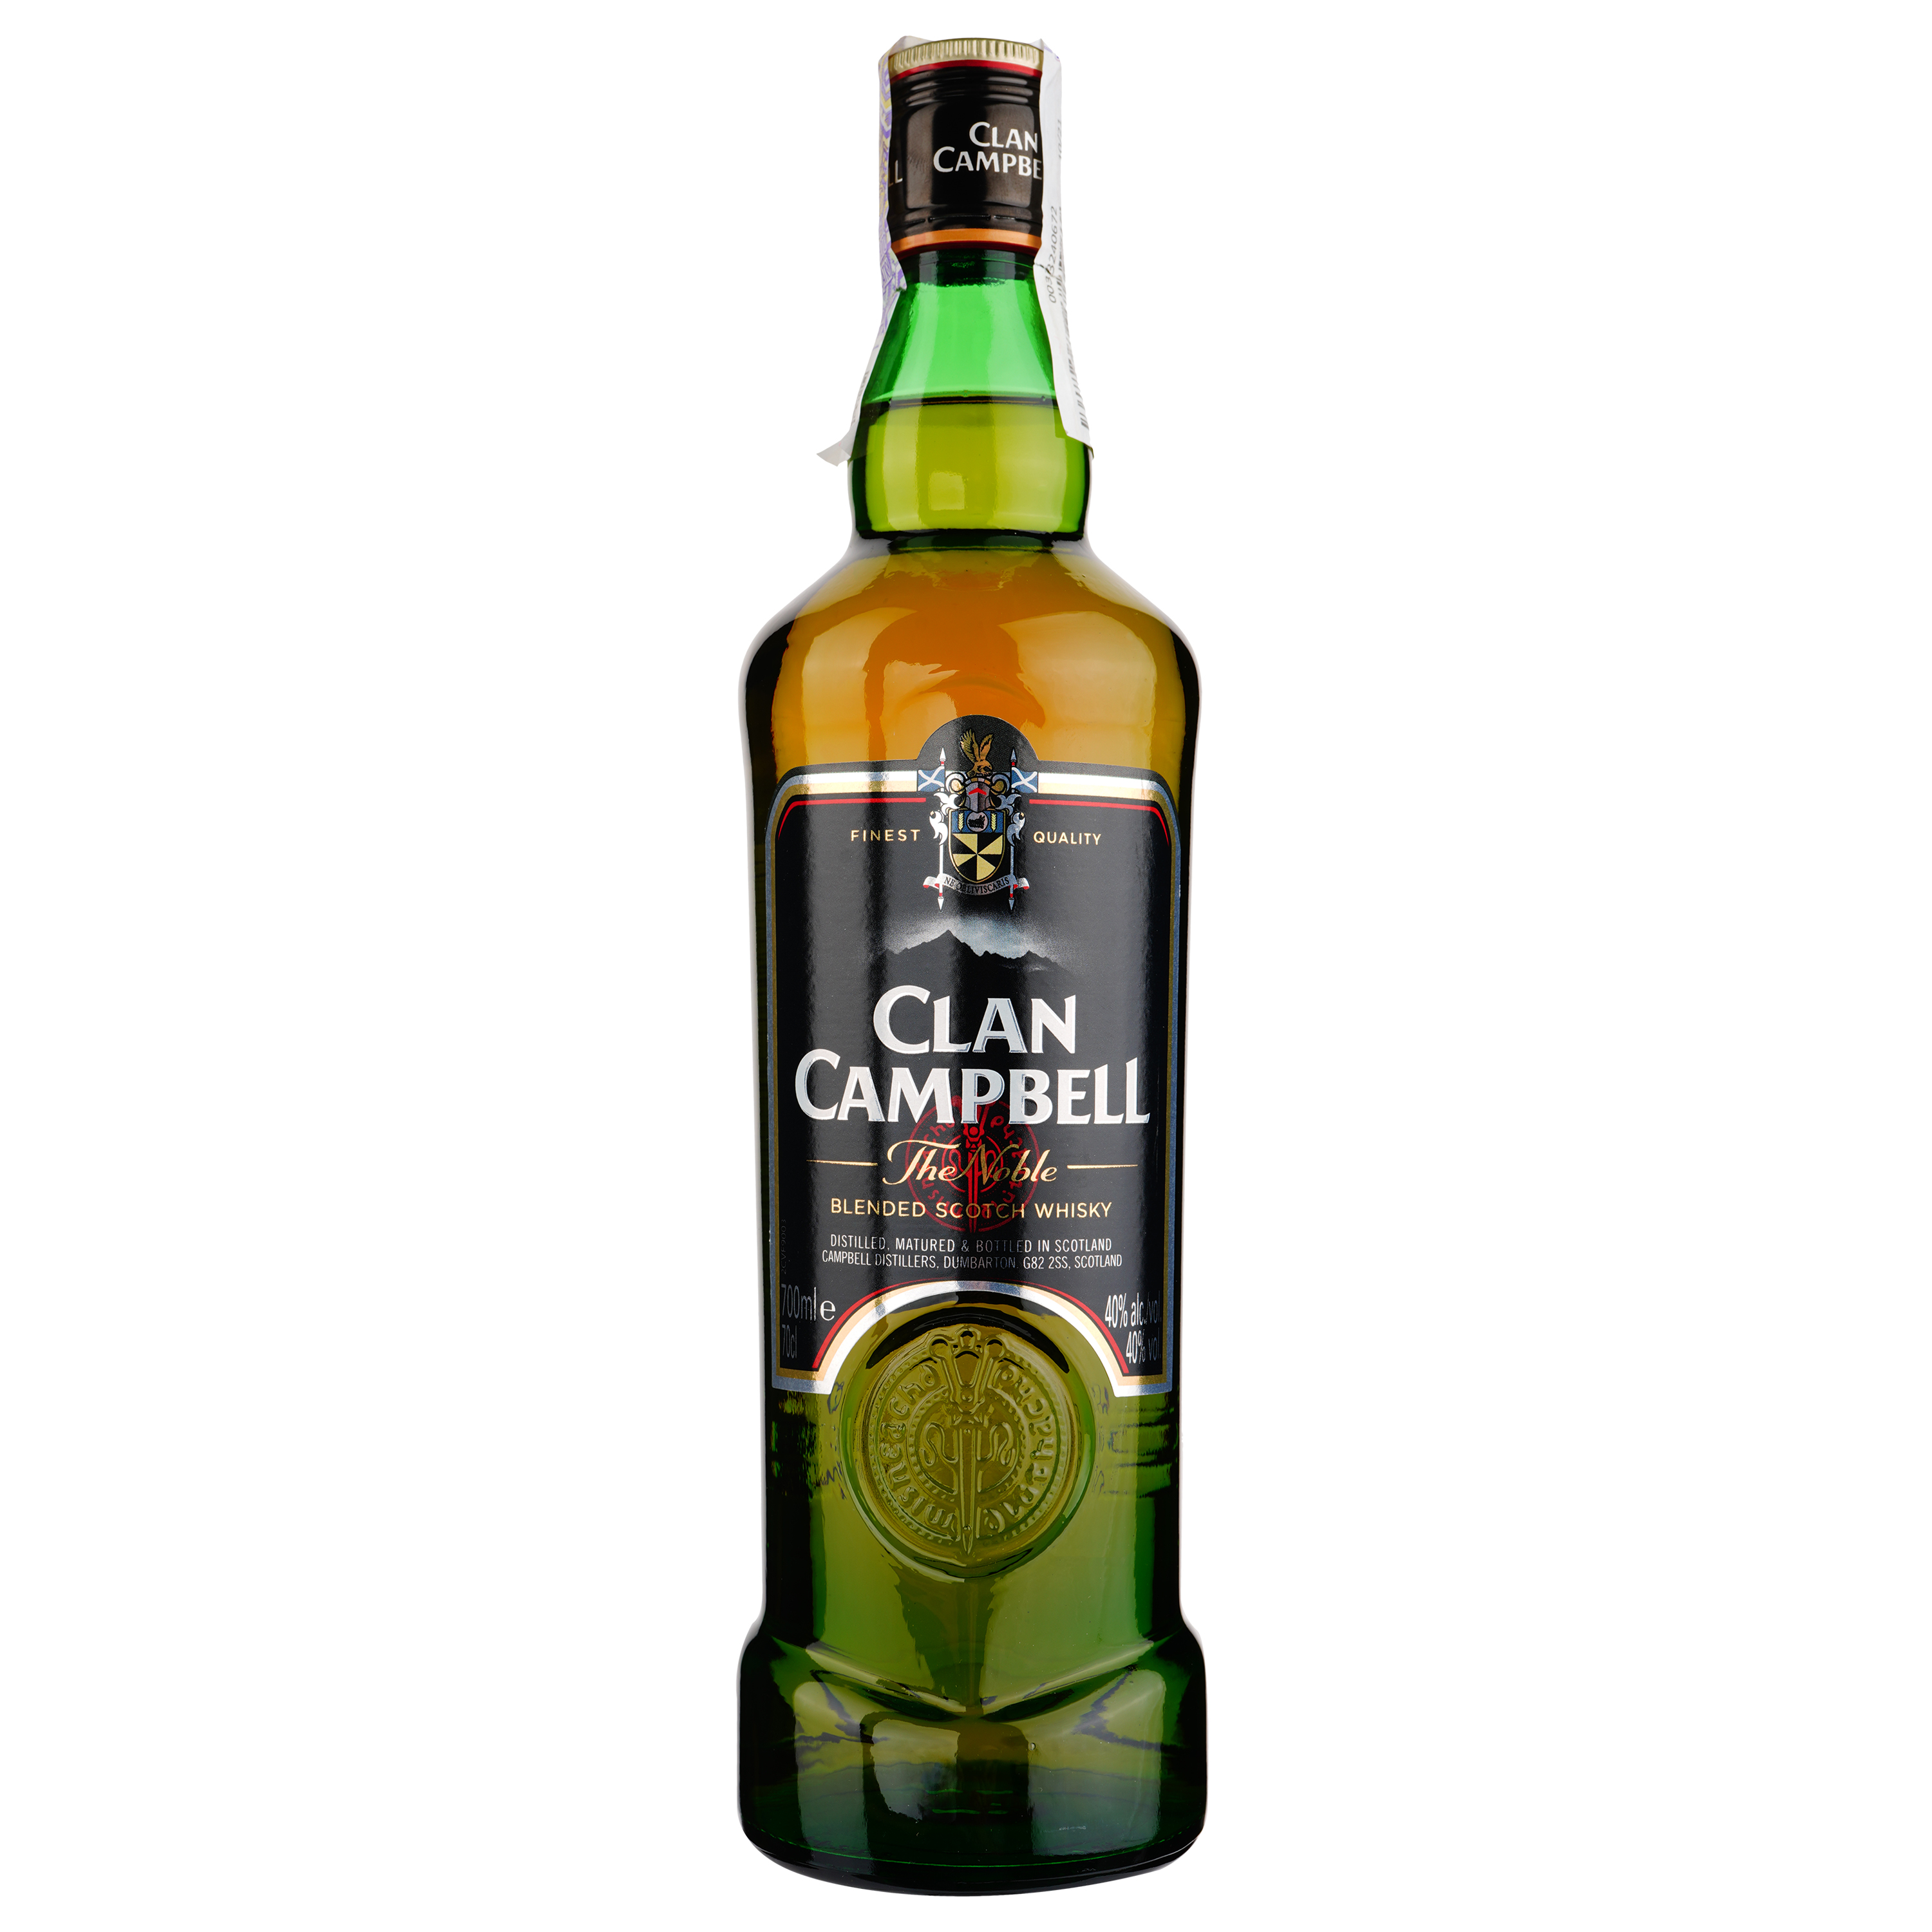 Виски Clan Campbell Blended Scotch Whisky, 40%, 0,7 л - фото 1